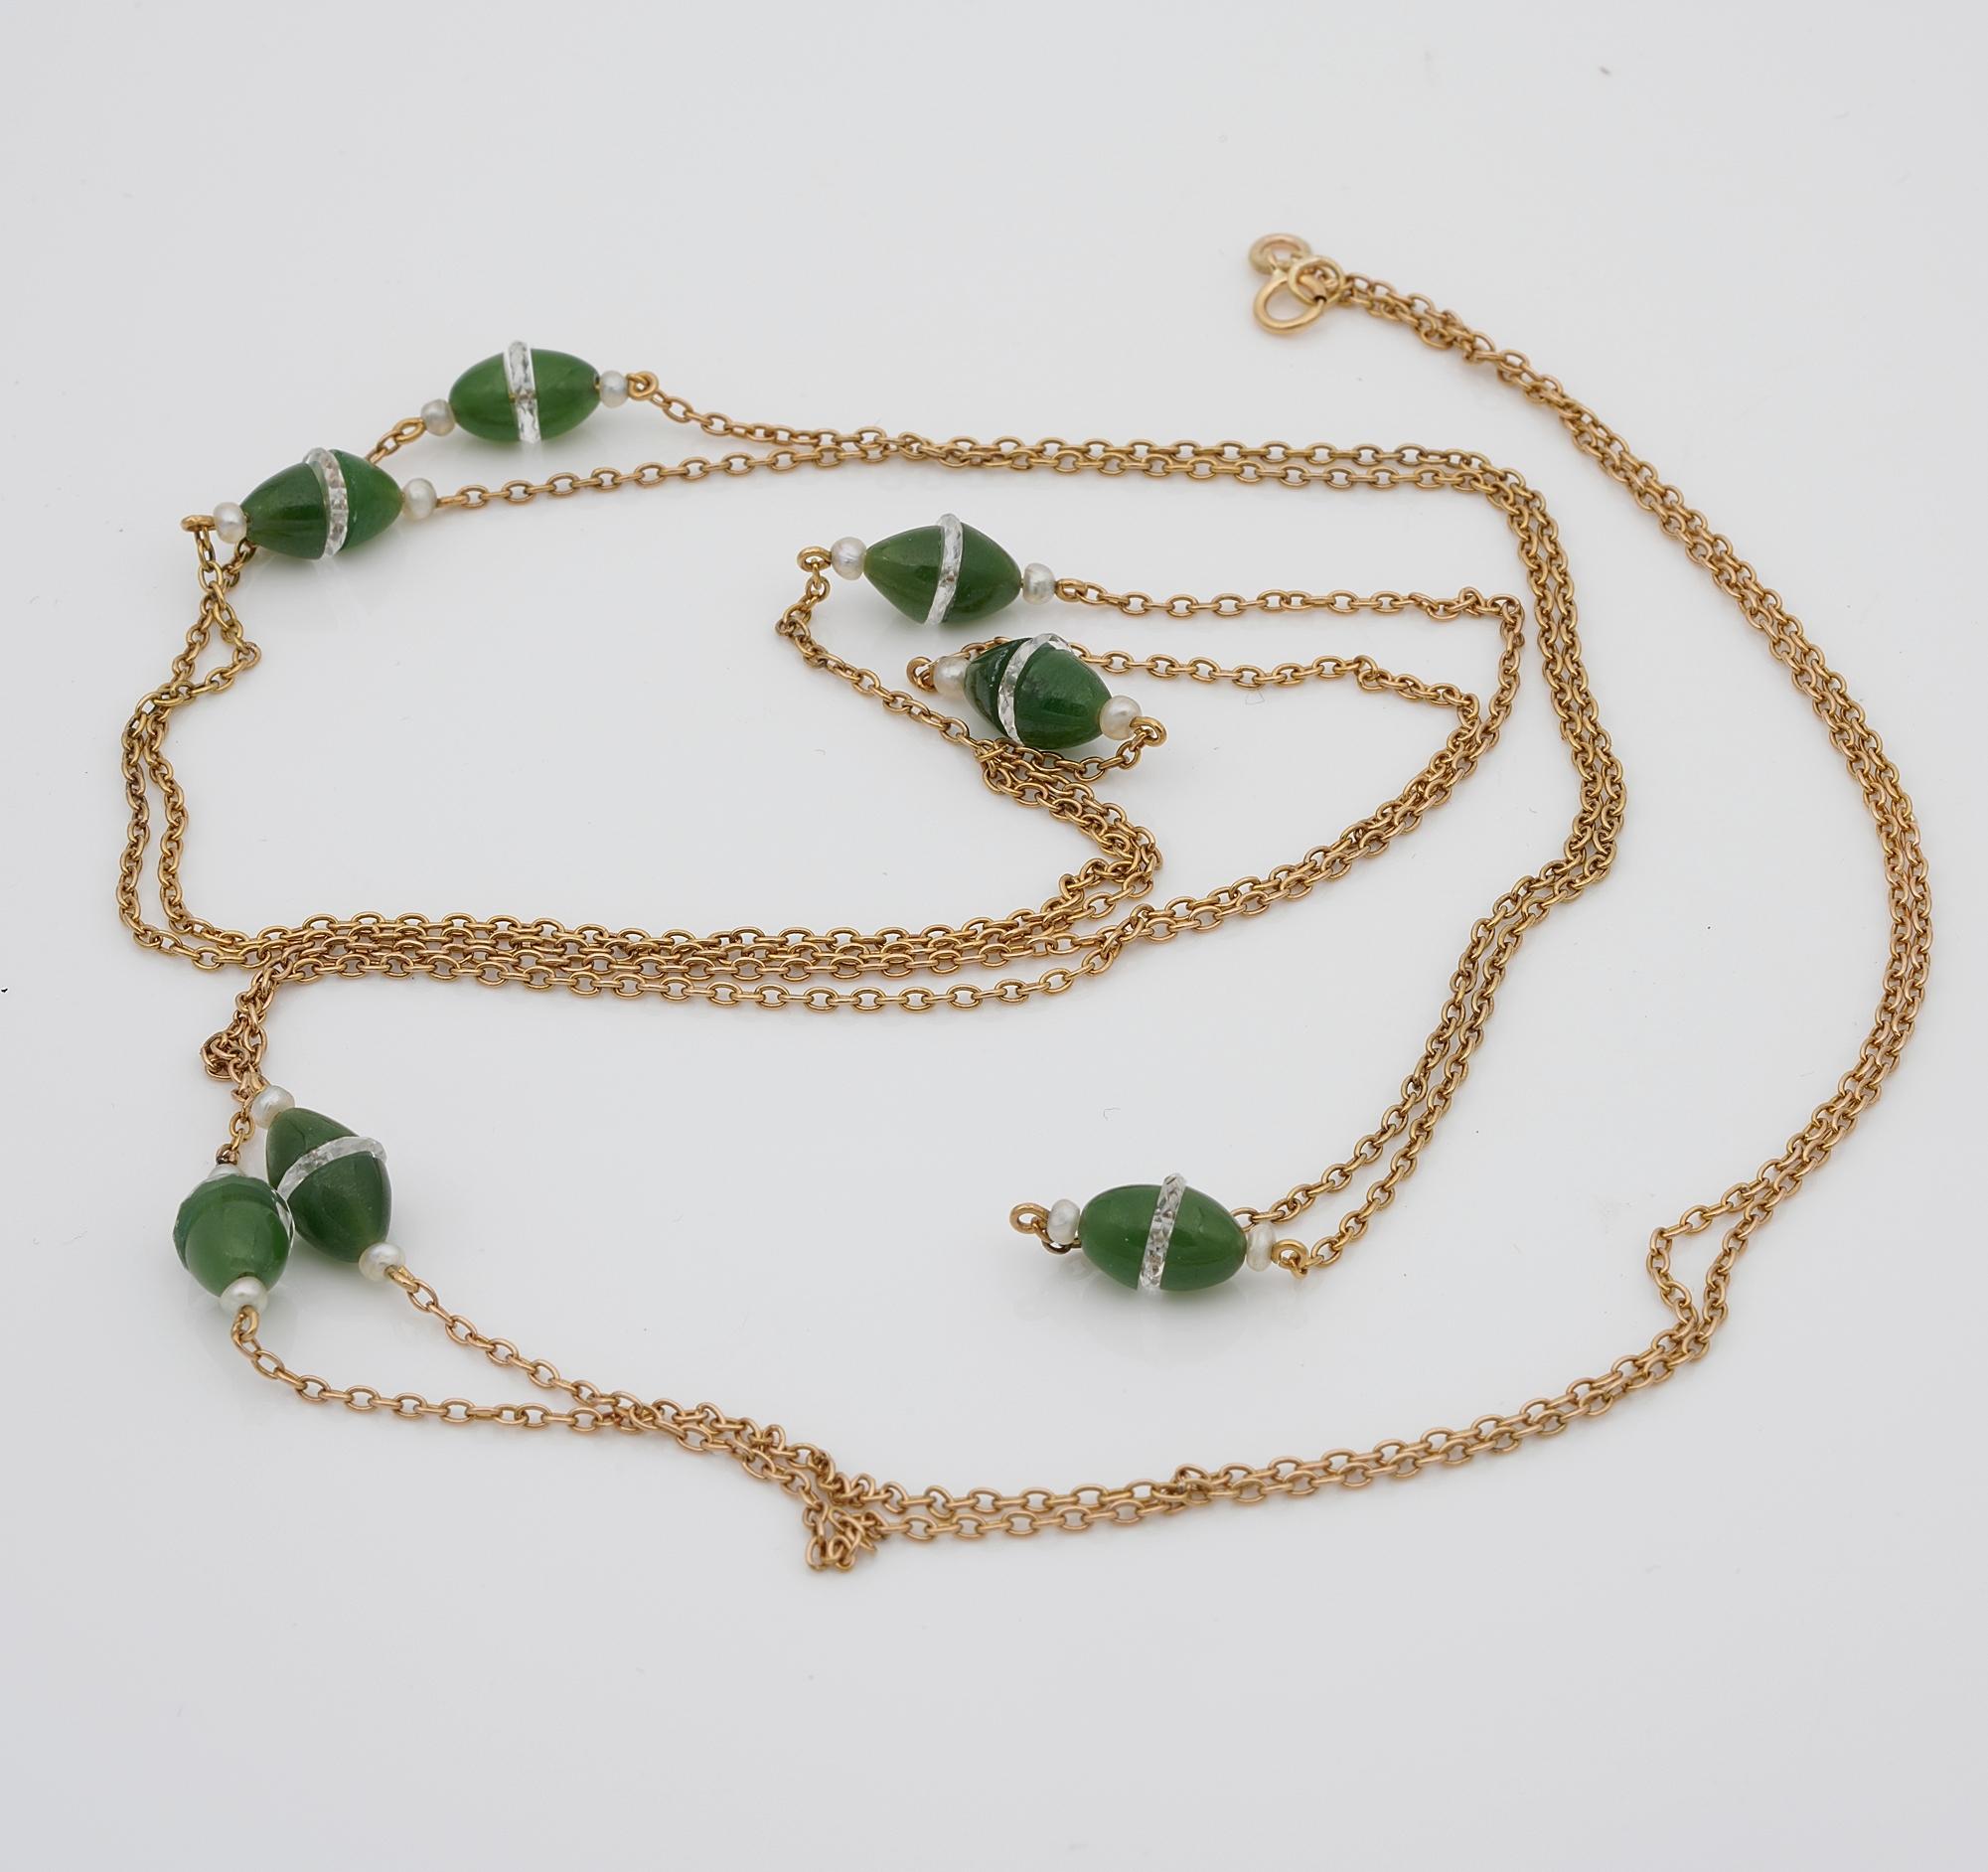 Bead Nephrite Jade Rock Crystal Pearl 18 KT Rare Long Suitor Chain For Sale